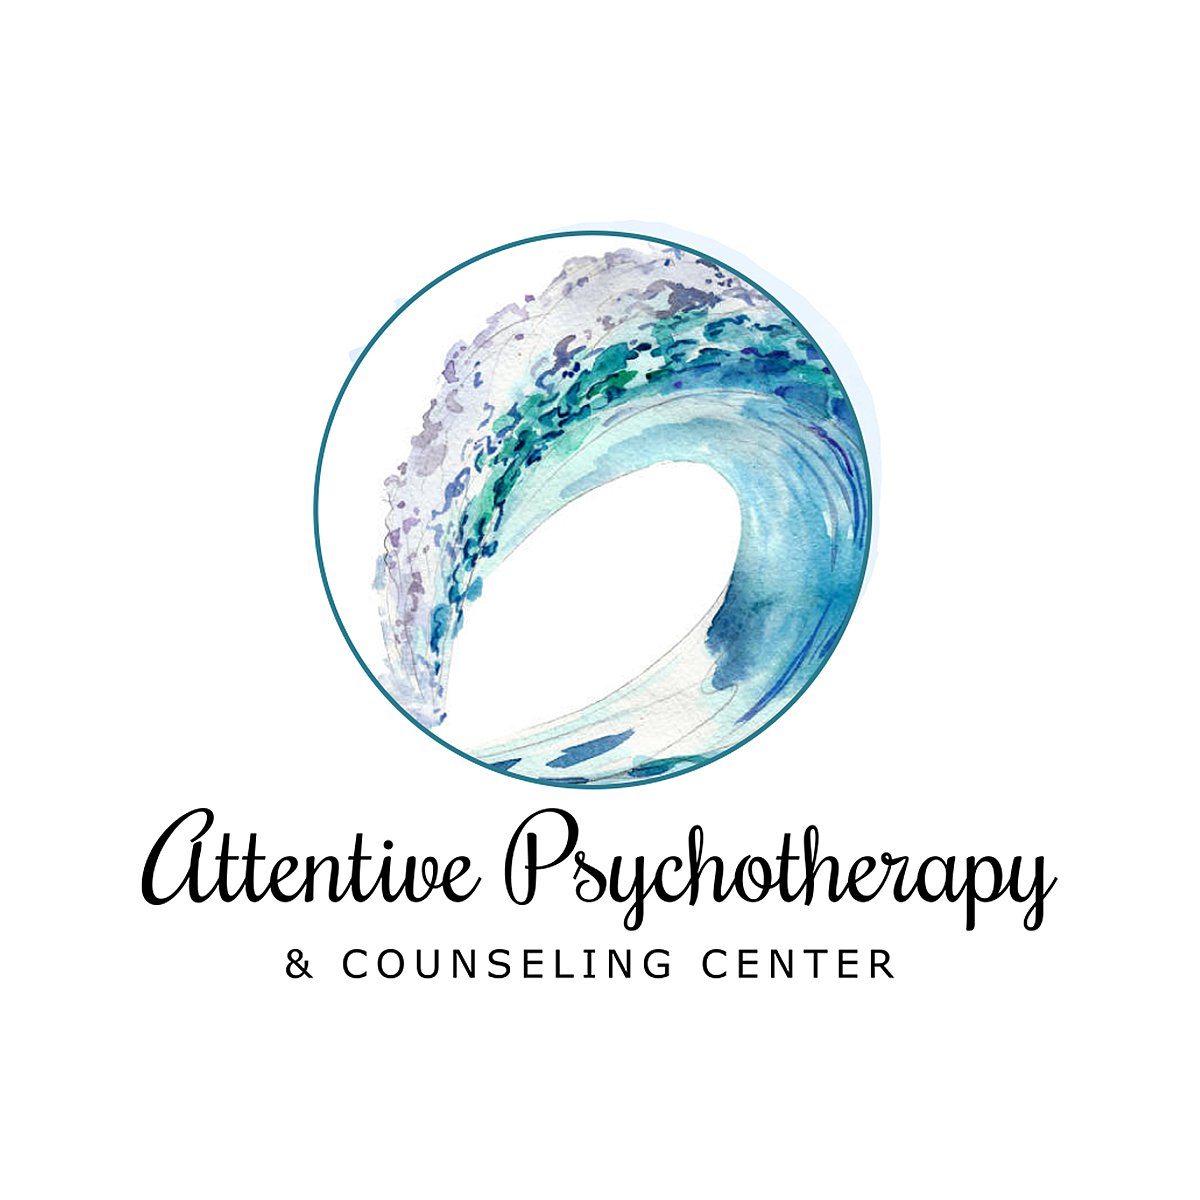 Attentive Psychotherapy & Counseling Center